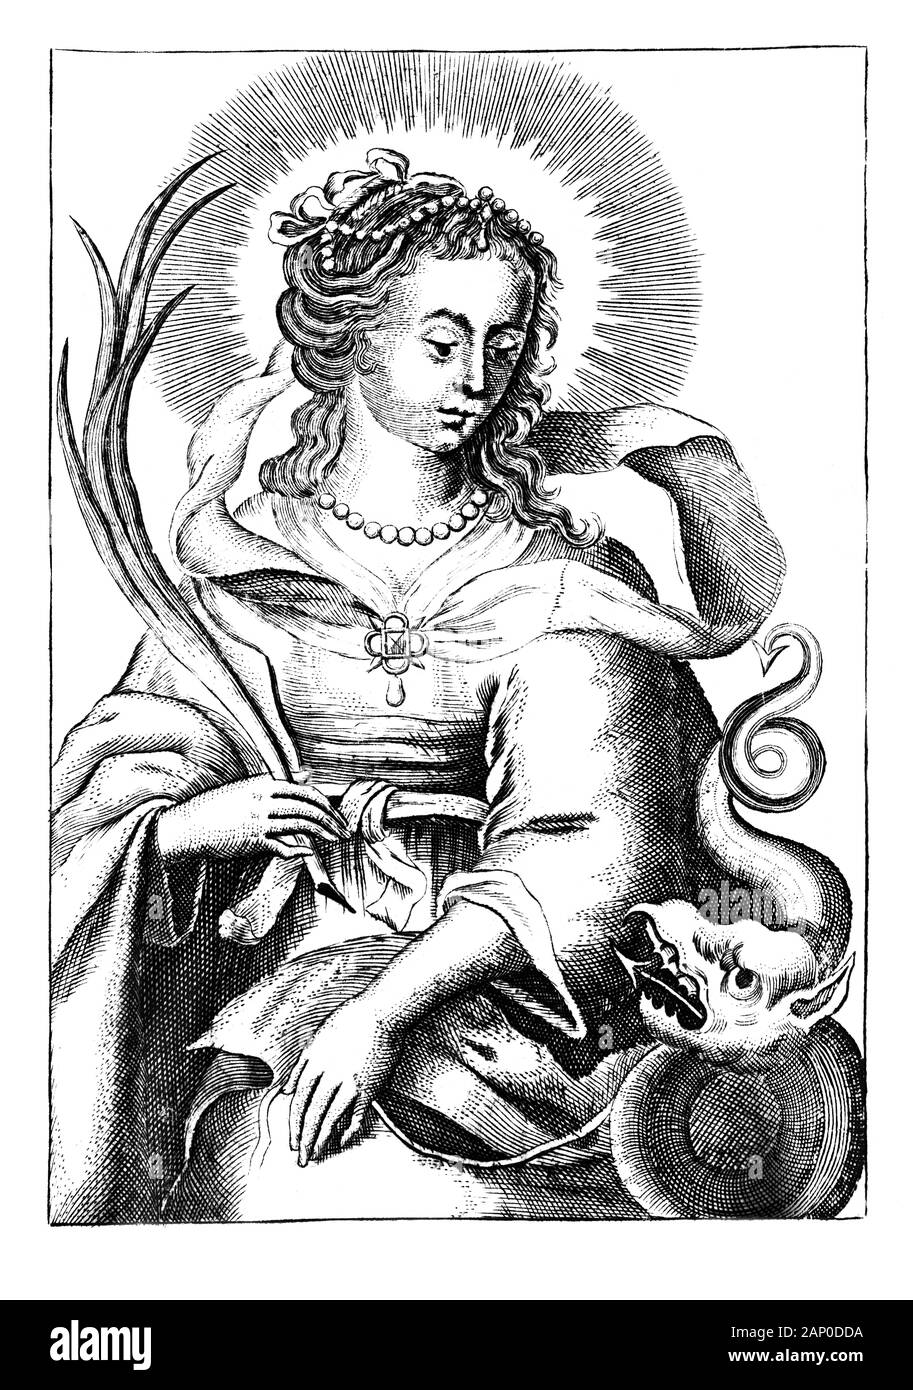 Antique vintage religious allegorical engraving or drawing of Christian holy woman saint Margaret of Antioch or Marina the Great Martyr.Illustration from Book Die Betrubte Und noch Ihrem Beliebten..., Austrian Empire,1716. Artist is unknown. Stock Photo